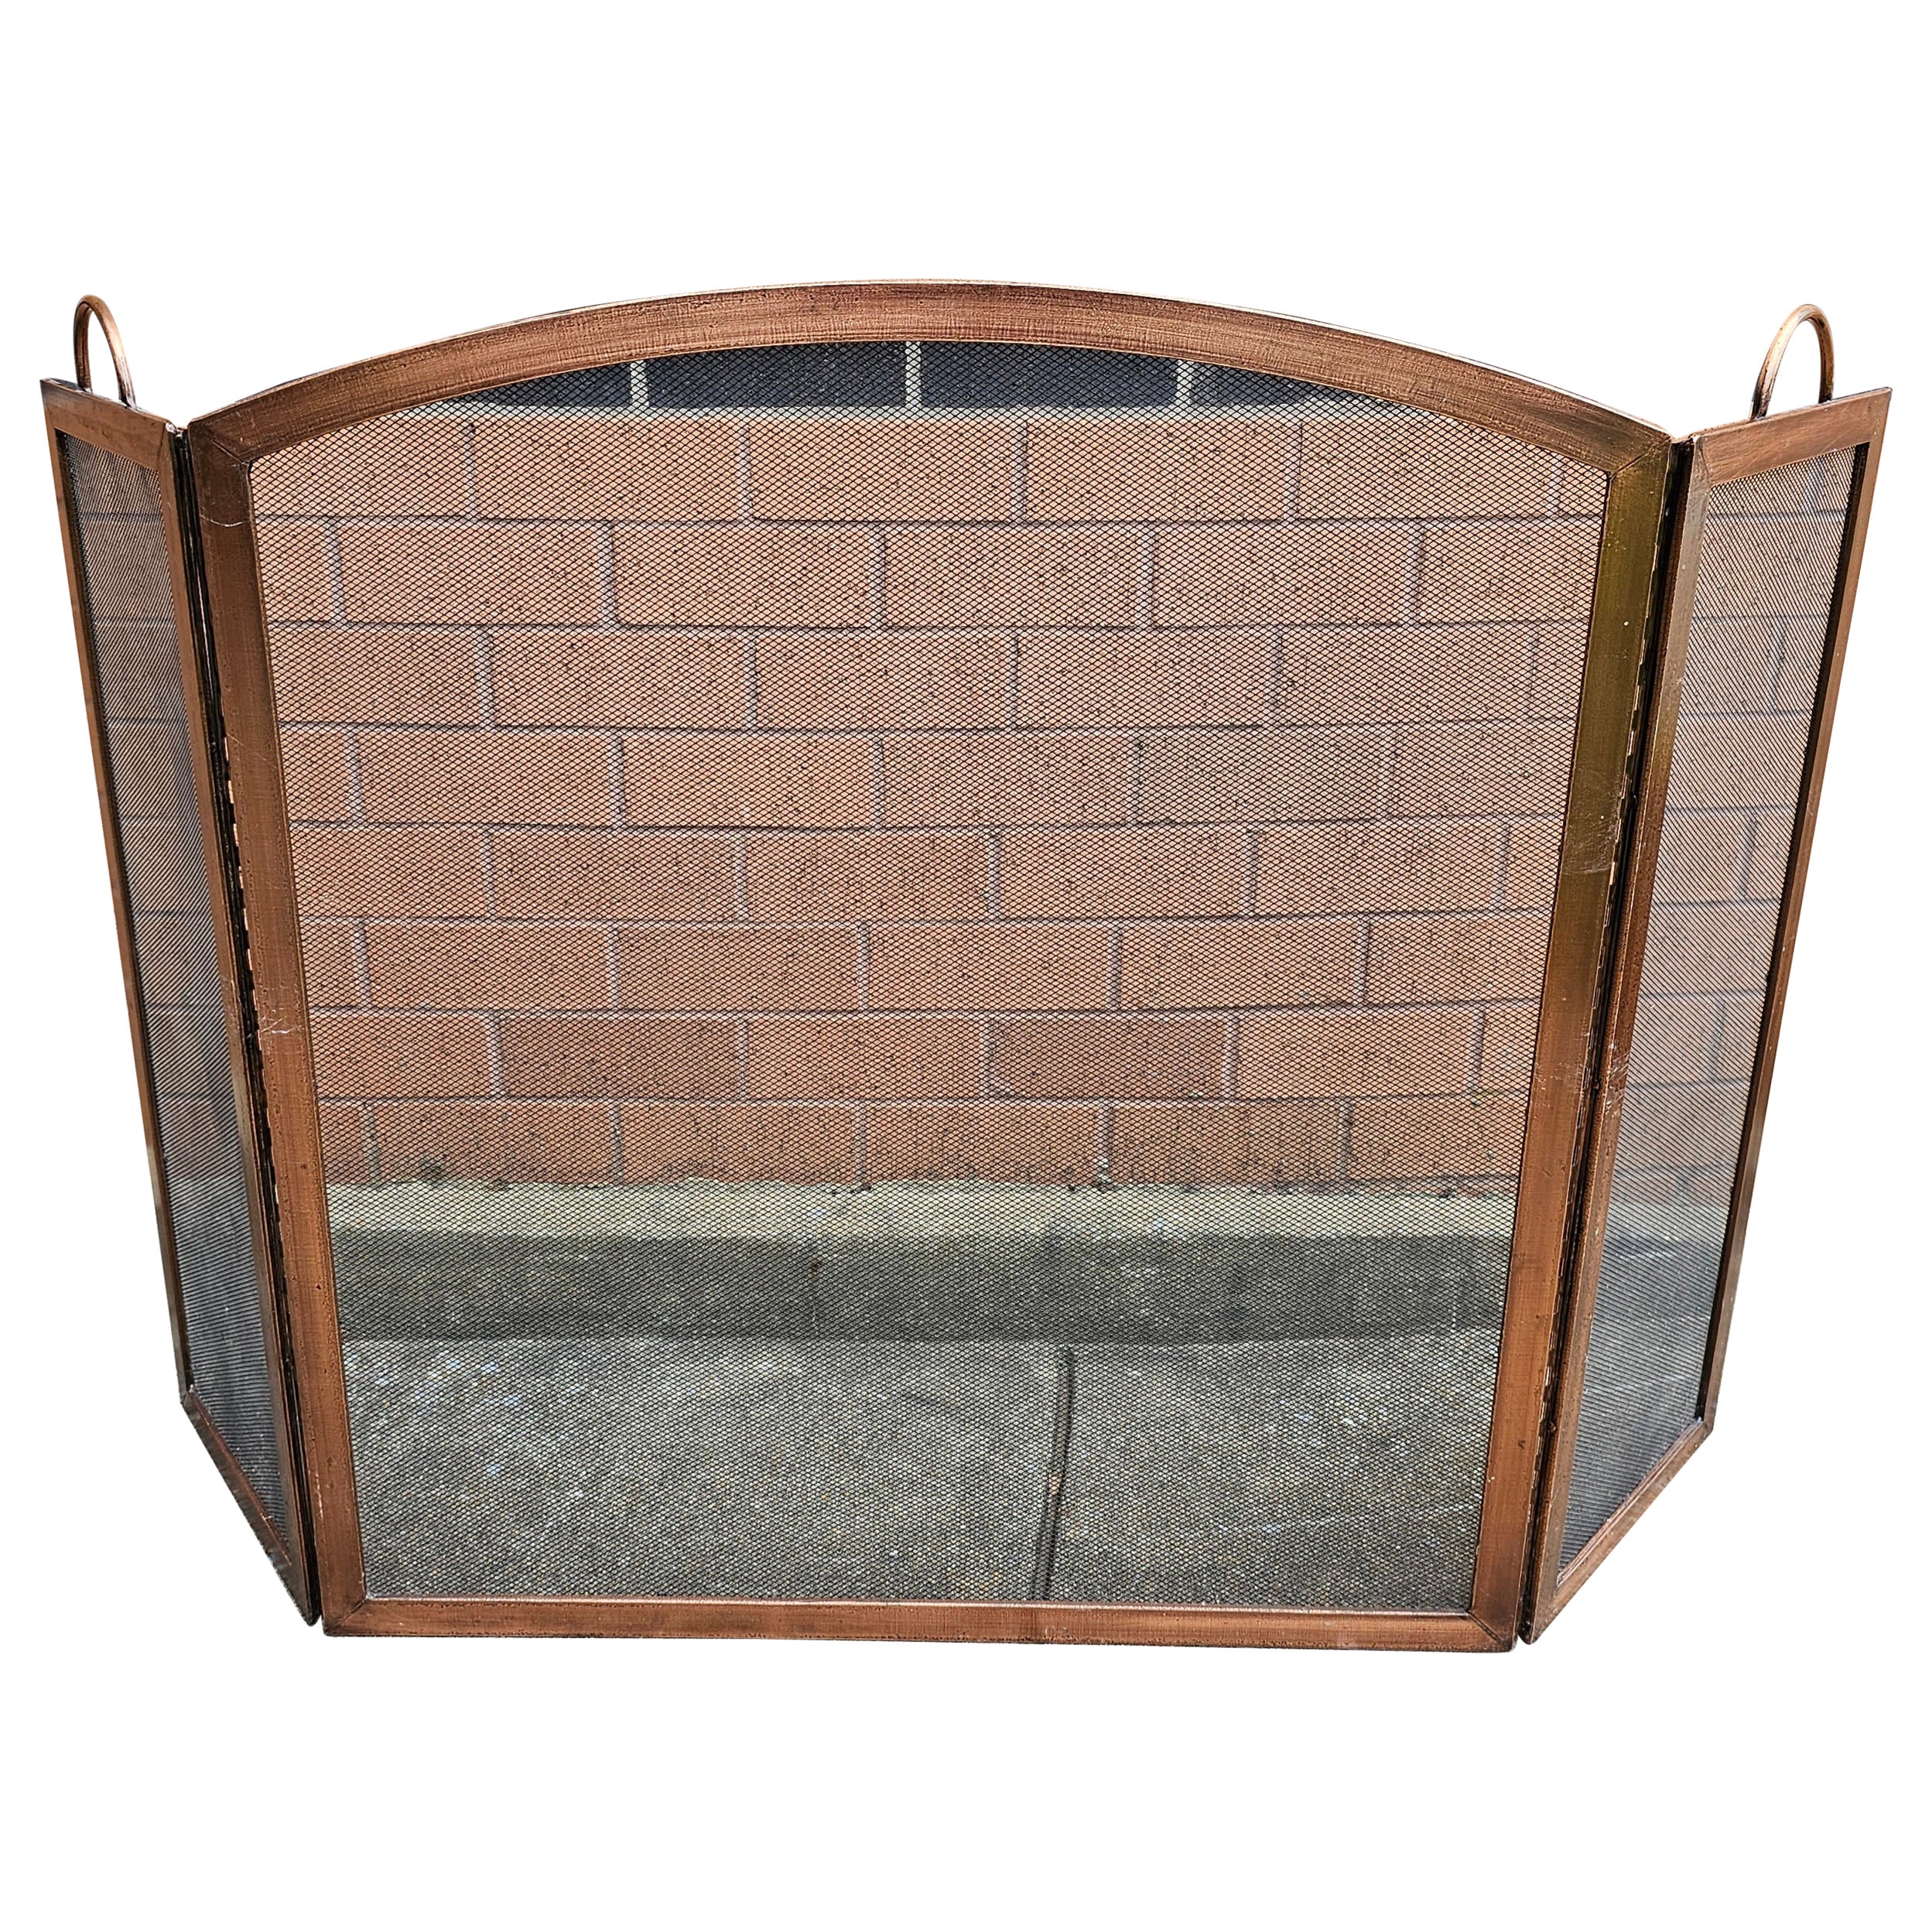 20th Century Copper Trifold Fireplace Screen